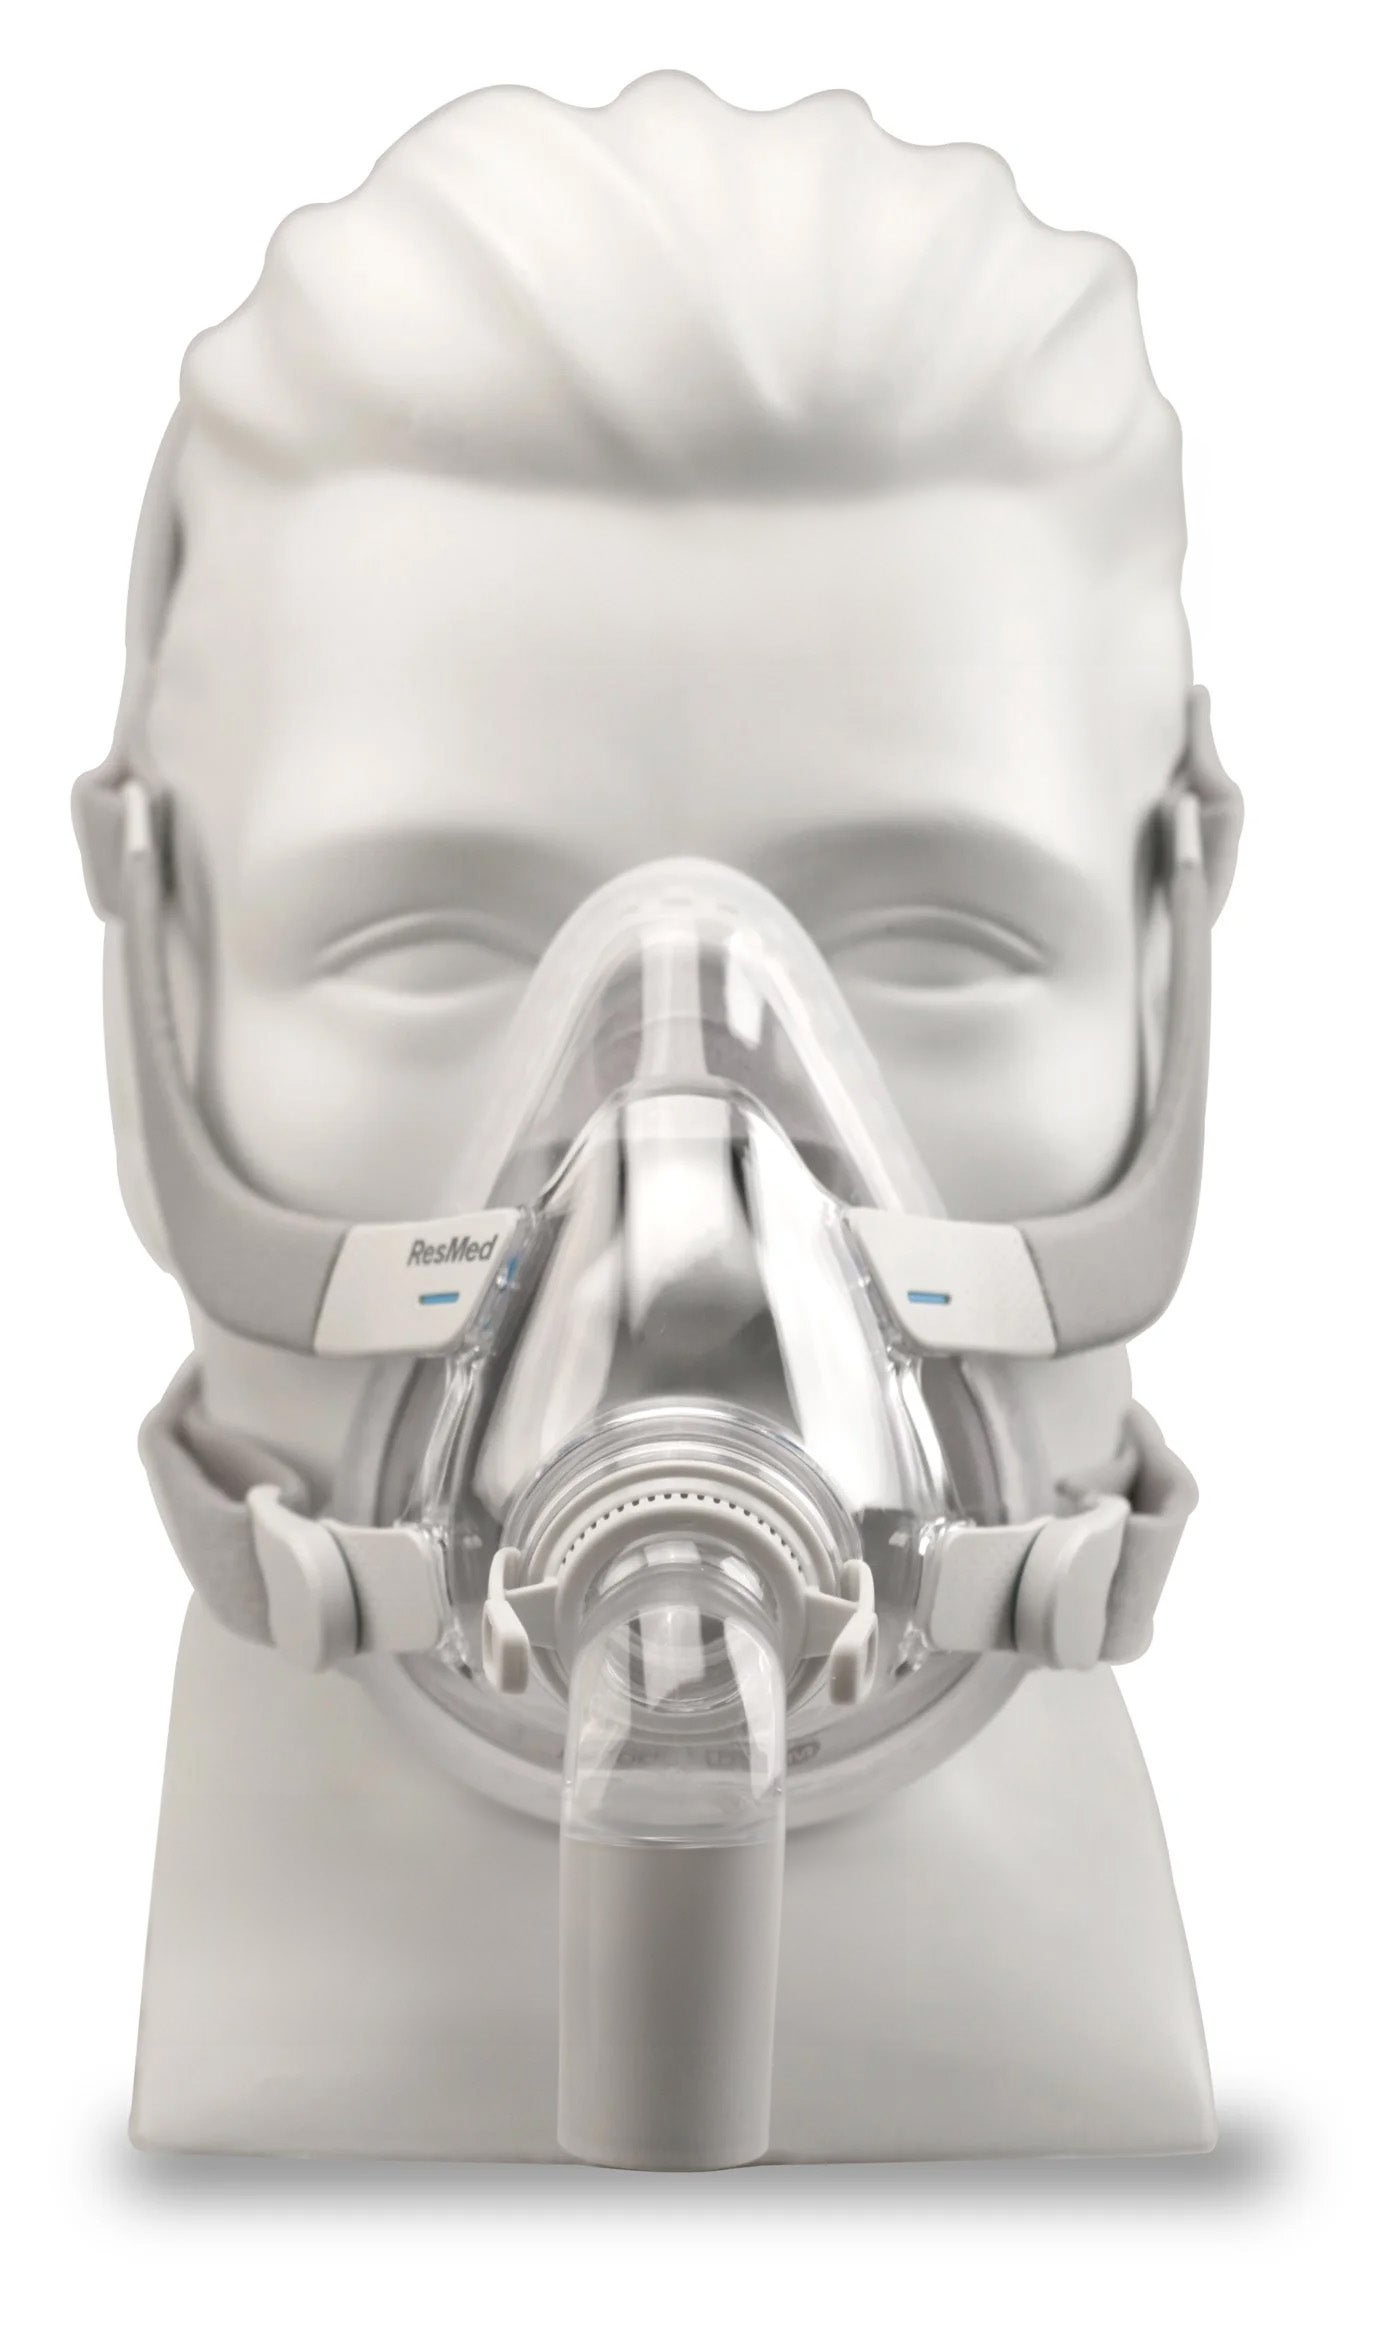 Resmed Airtouch F20™ Full Face Cpap Mask With Headgear 5625